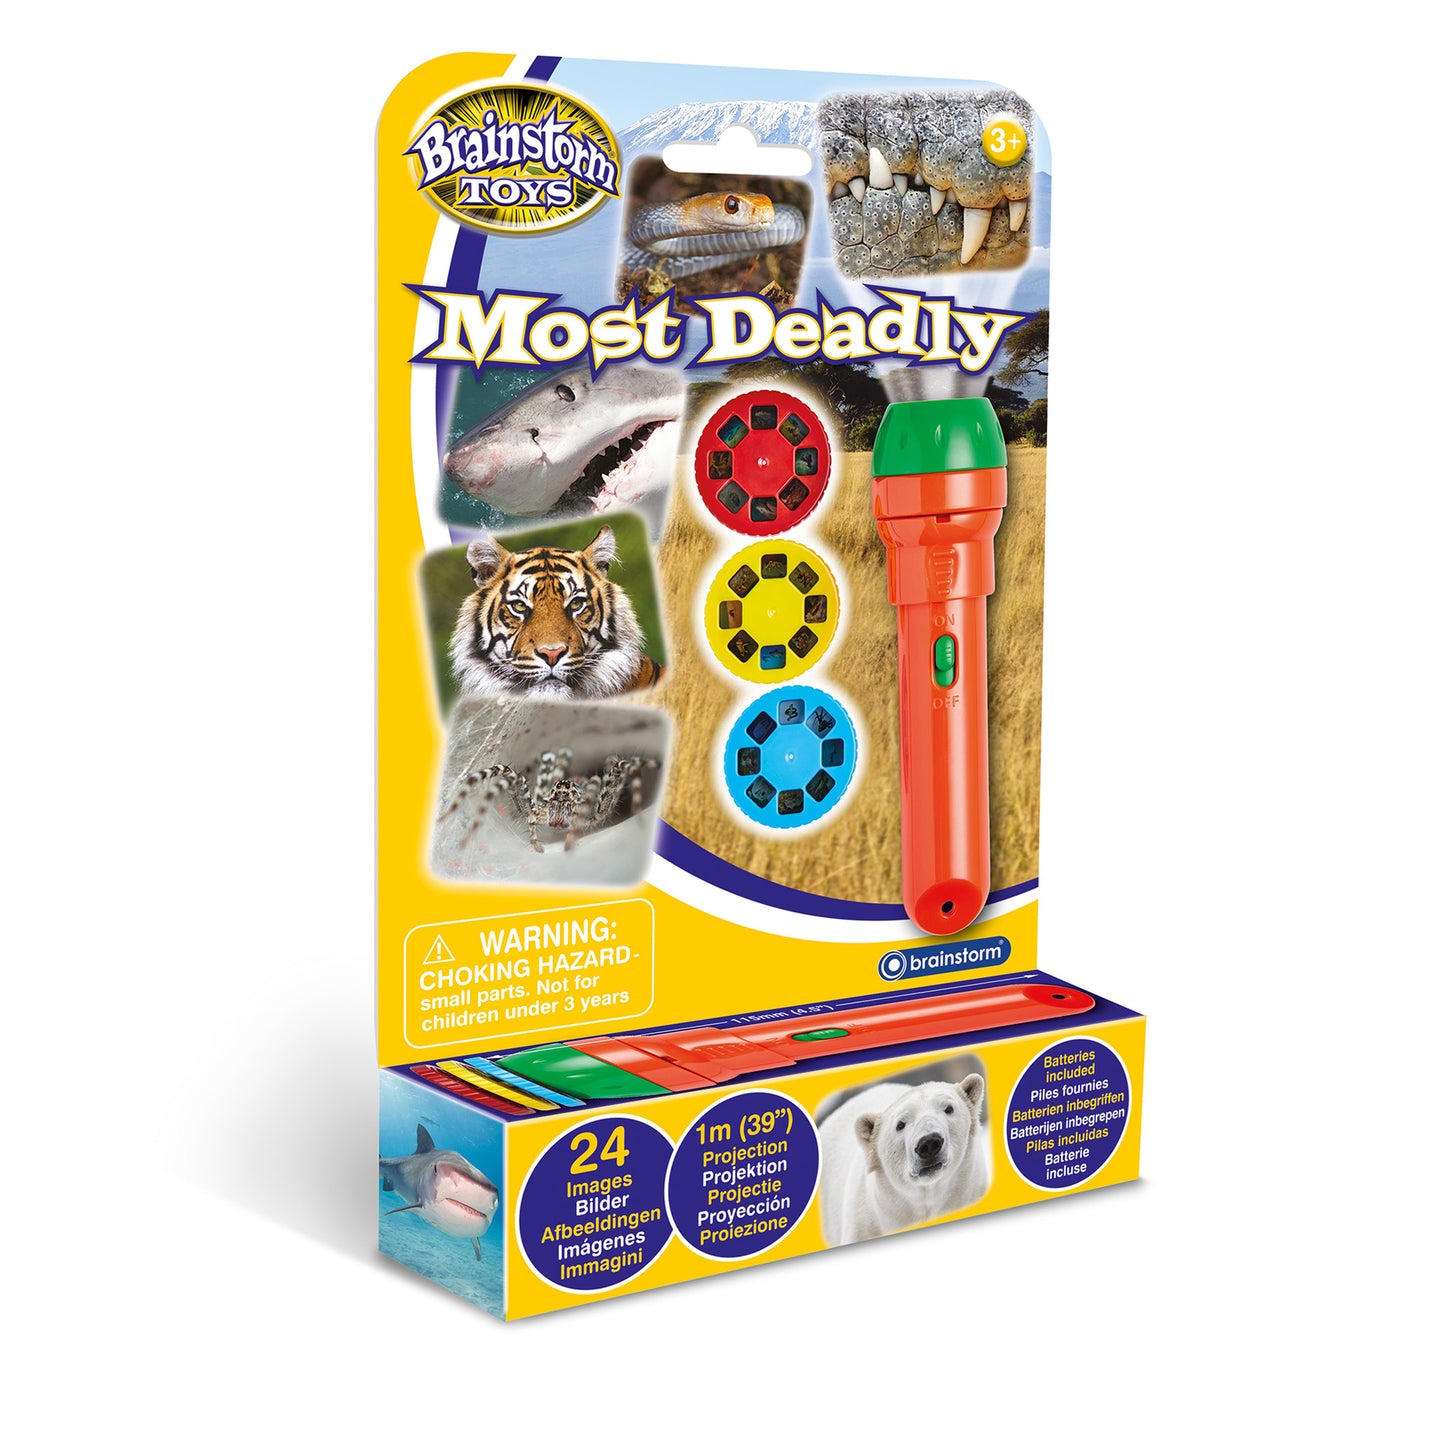 Most Deadly Torch & Projector